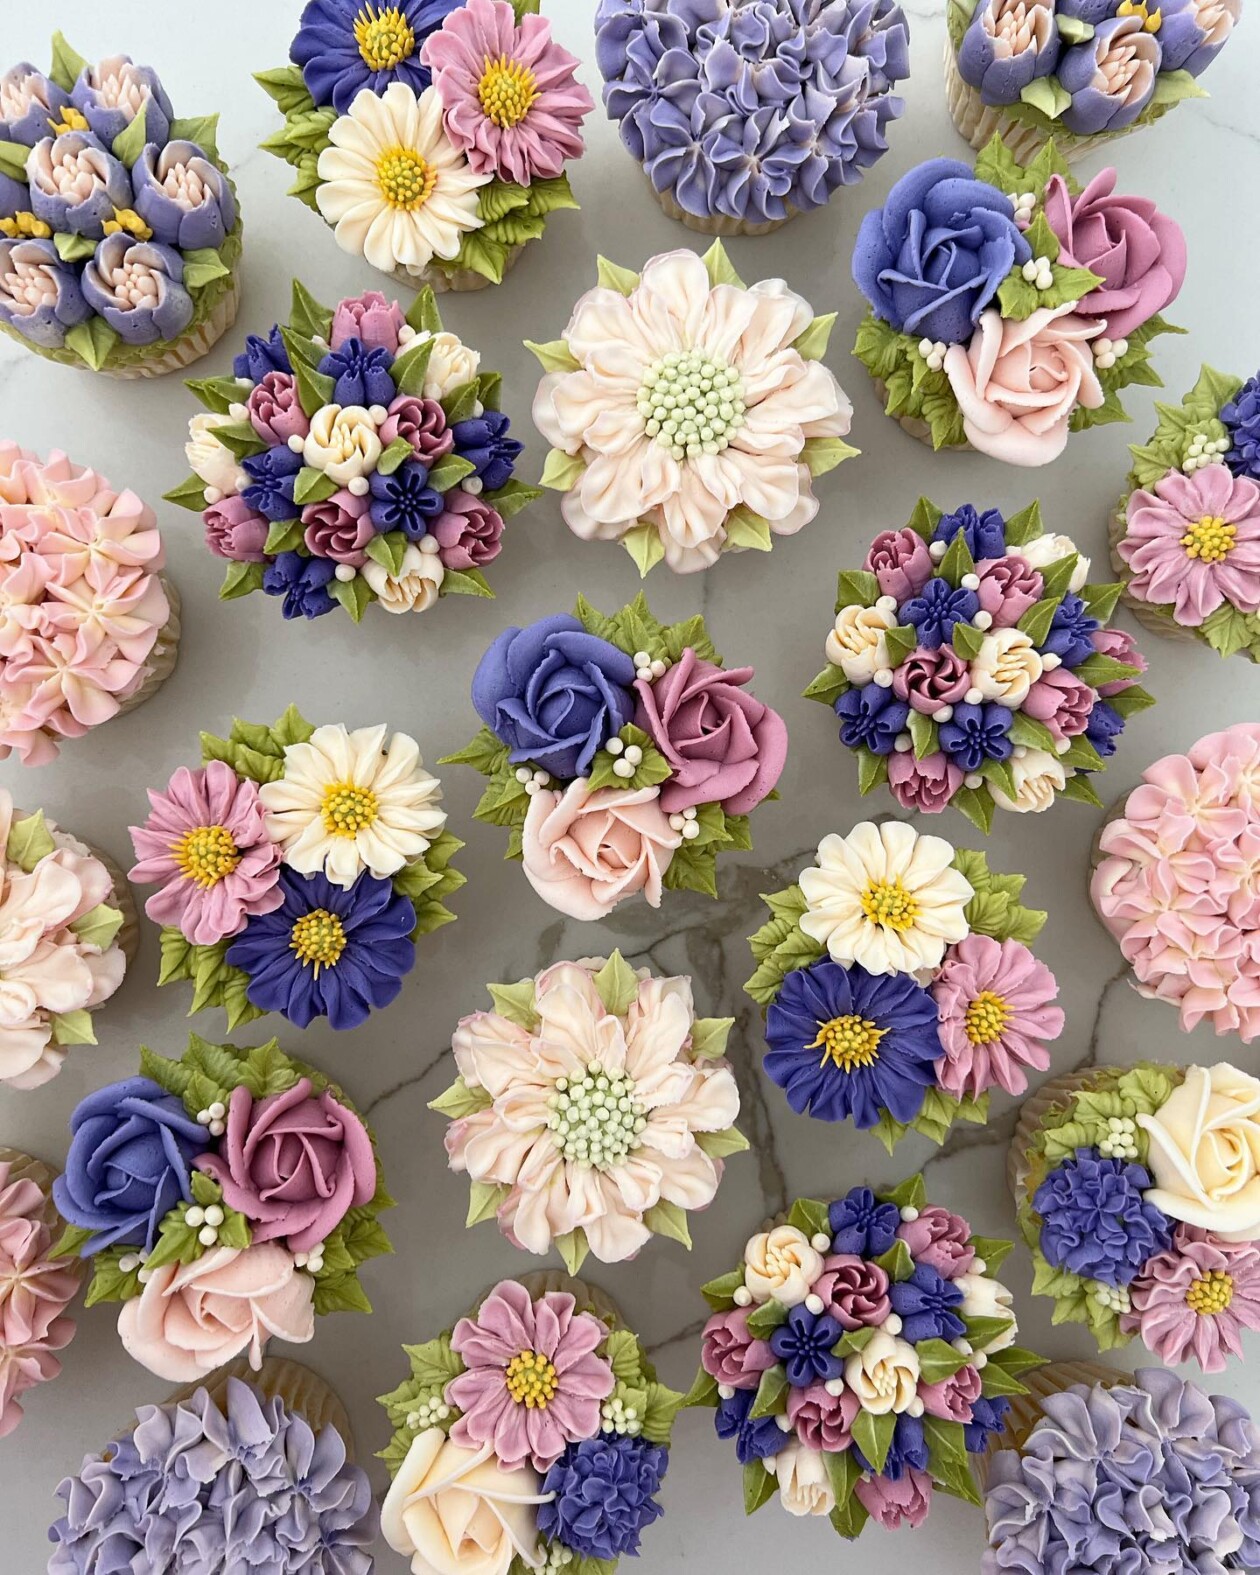 Gorgeous Cupcakes Decorated With Buttercream Flowers And Succulents By Kerry's Bouqcakes (10)